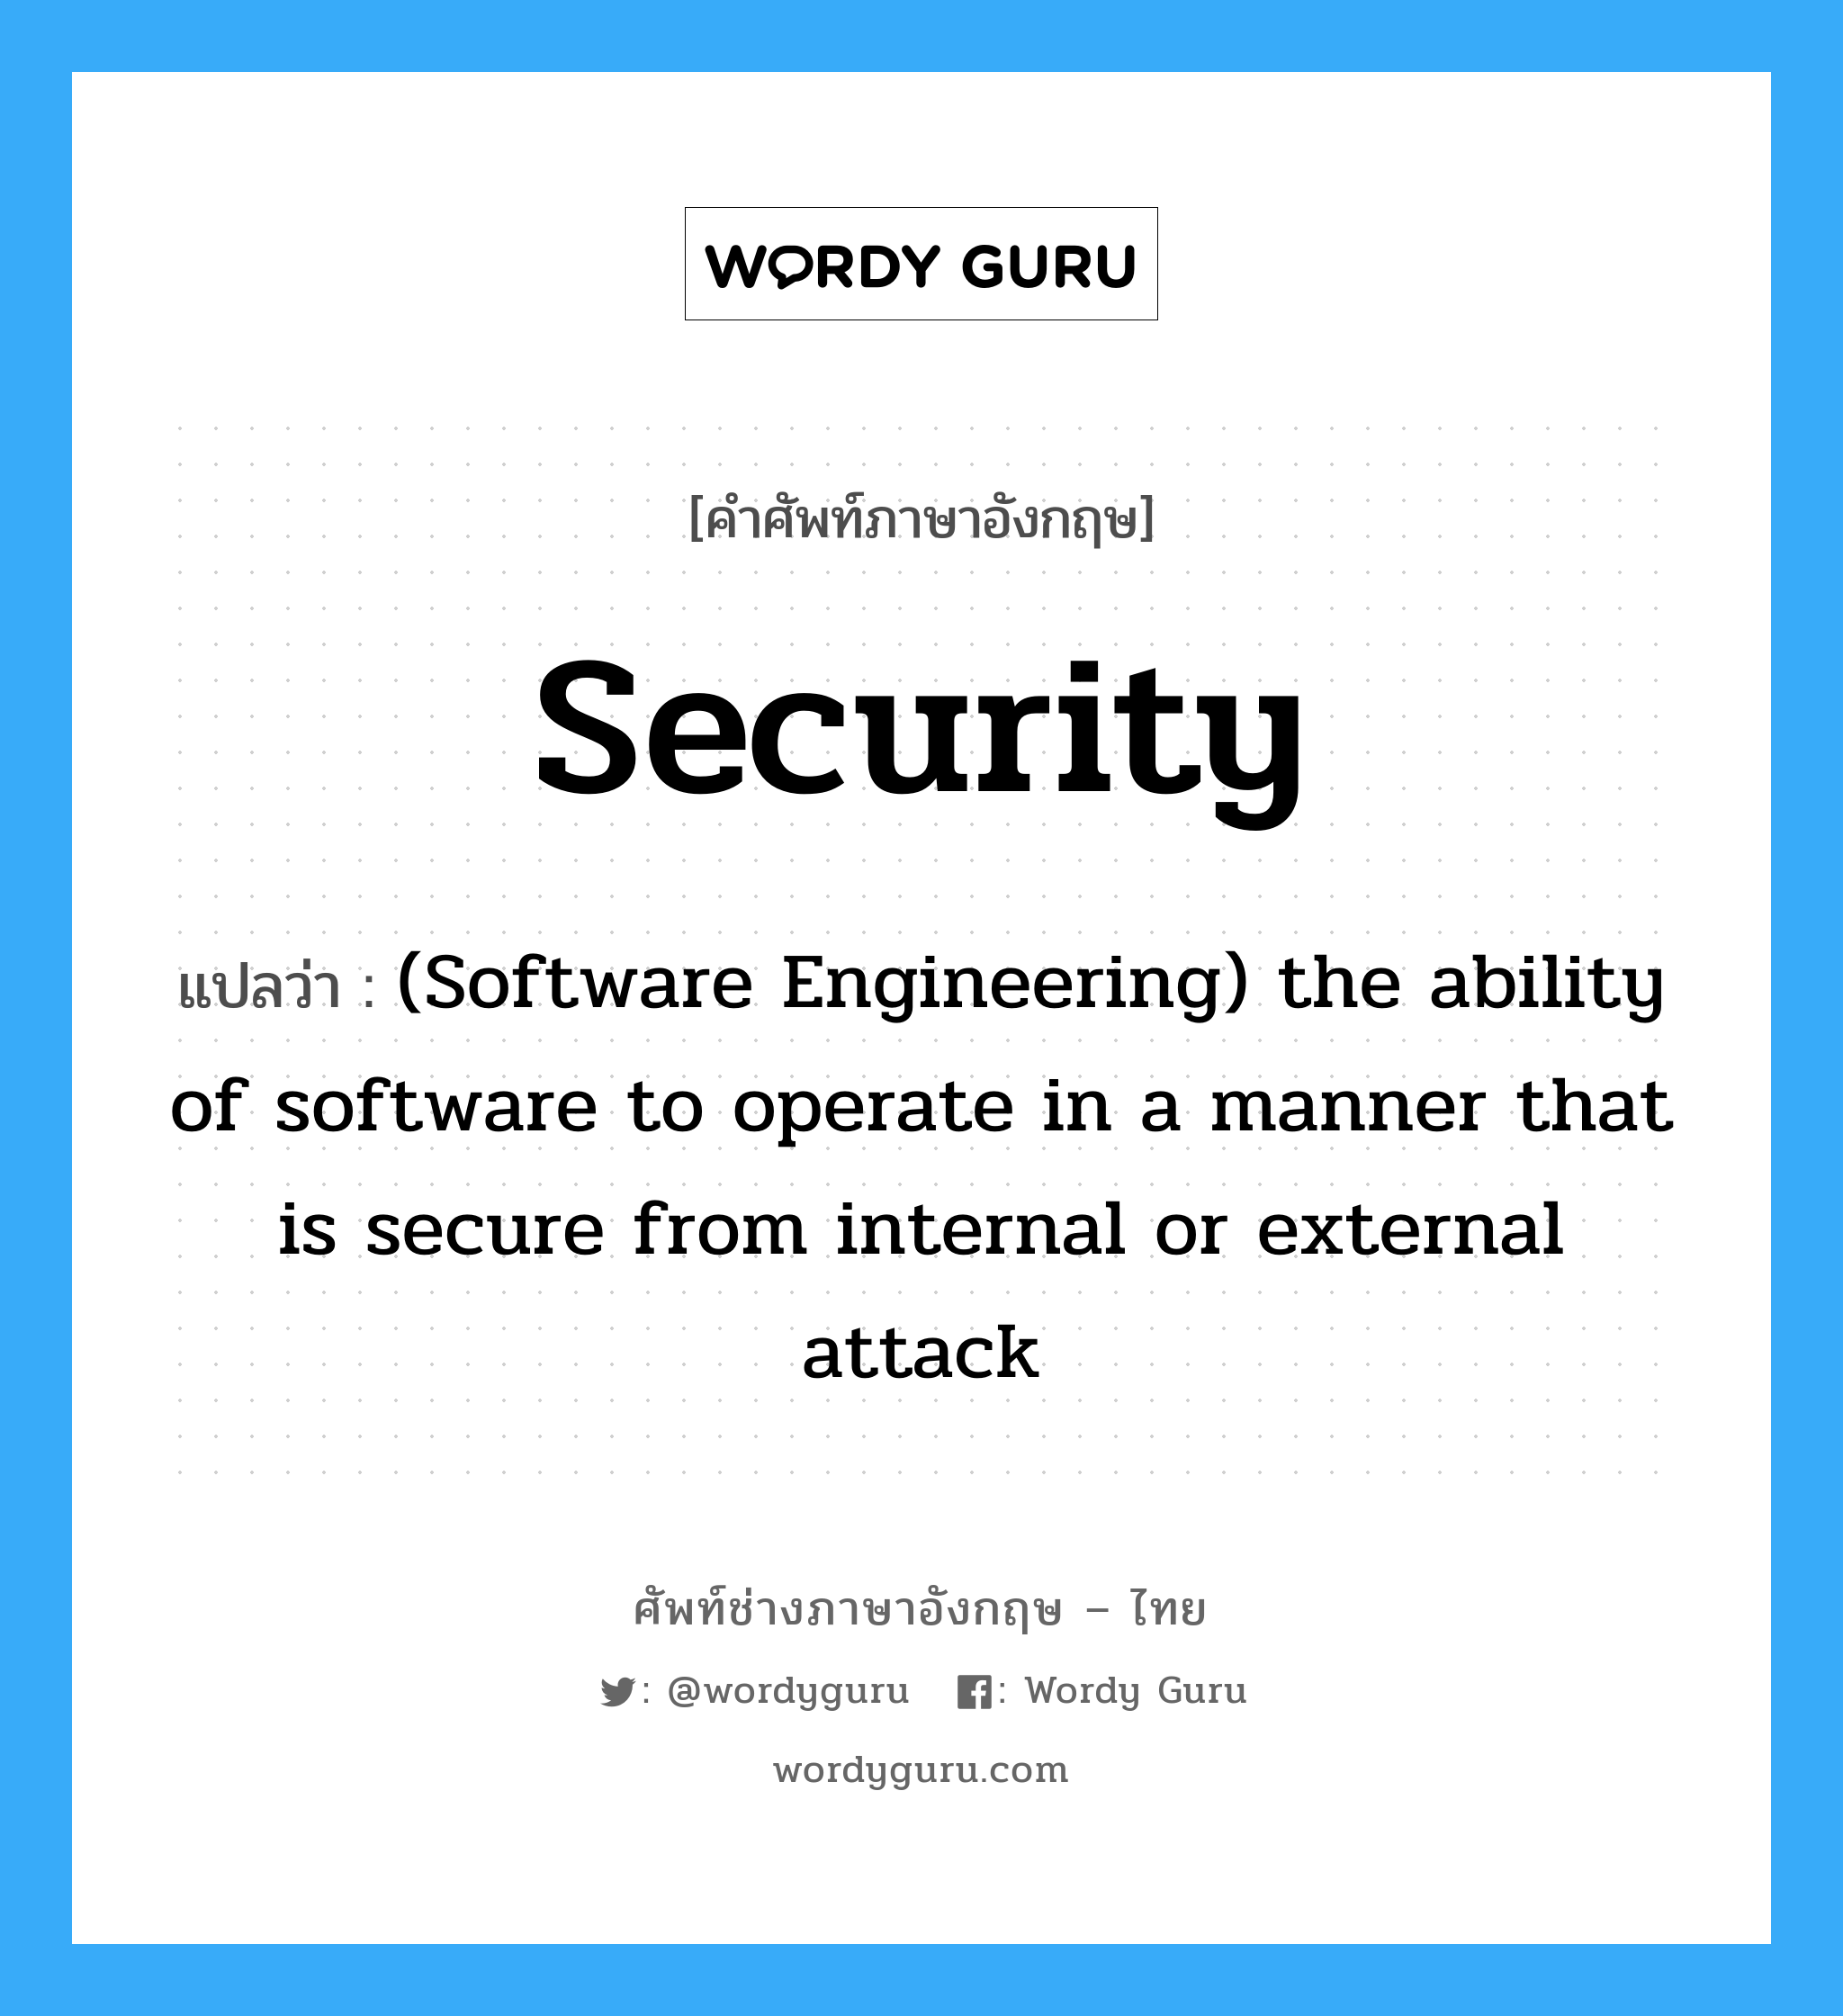 (Software Engineering) the ability of software to operate in a manner that is secure from internal or external attack ภาษาอังกฤษ?, คำศัพท์ช่างภาษาอังกฤษ - ไทย (Software Engineering) the ability of software to operate in a manner that is secure from internal or external attack คำศัพท์ภาษาอังกฤษ (Software Engineering) the ability of software to operate in a manner that is secure from internal or external attack แปลว่า Security